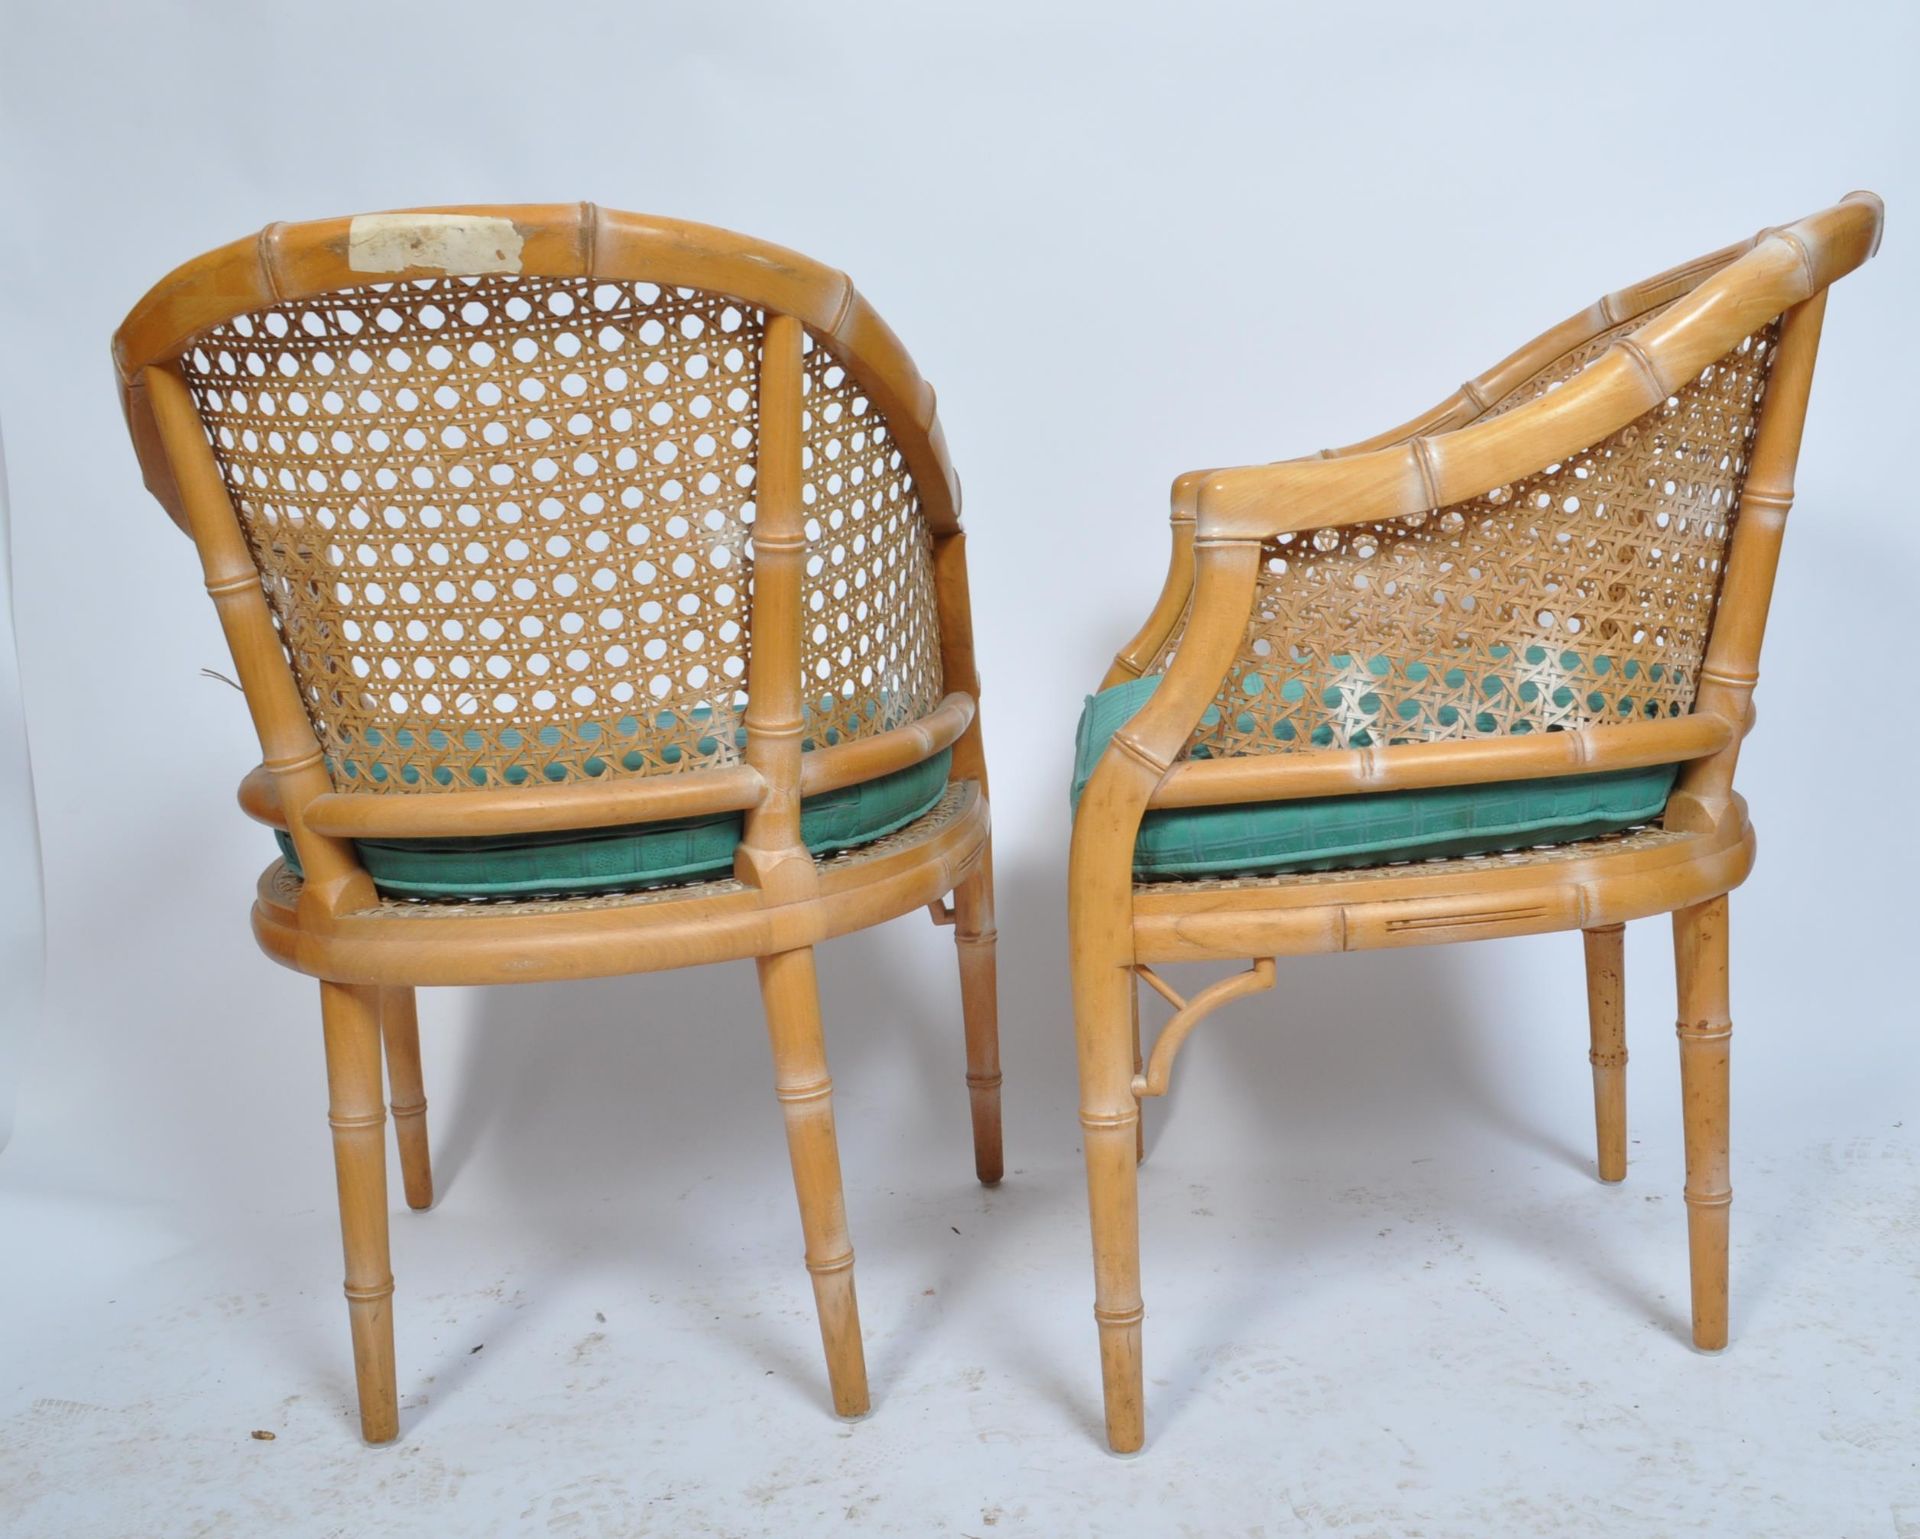 GIORGETTI MANNER RETRO VINTAGE CIRCA 1970S BAMBOO DINING CHAIRS - Image 5 of 5